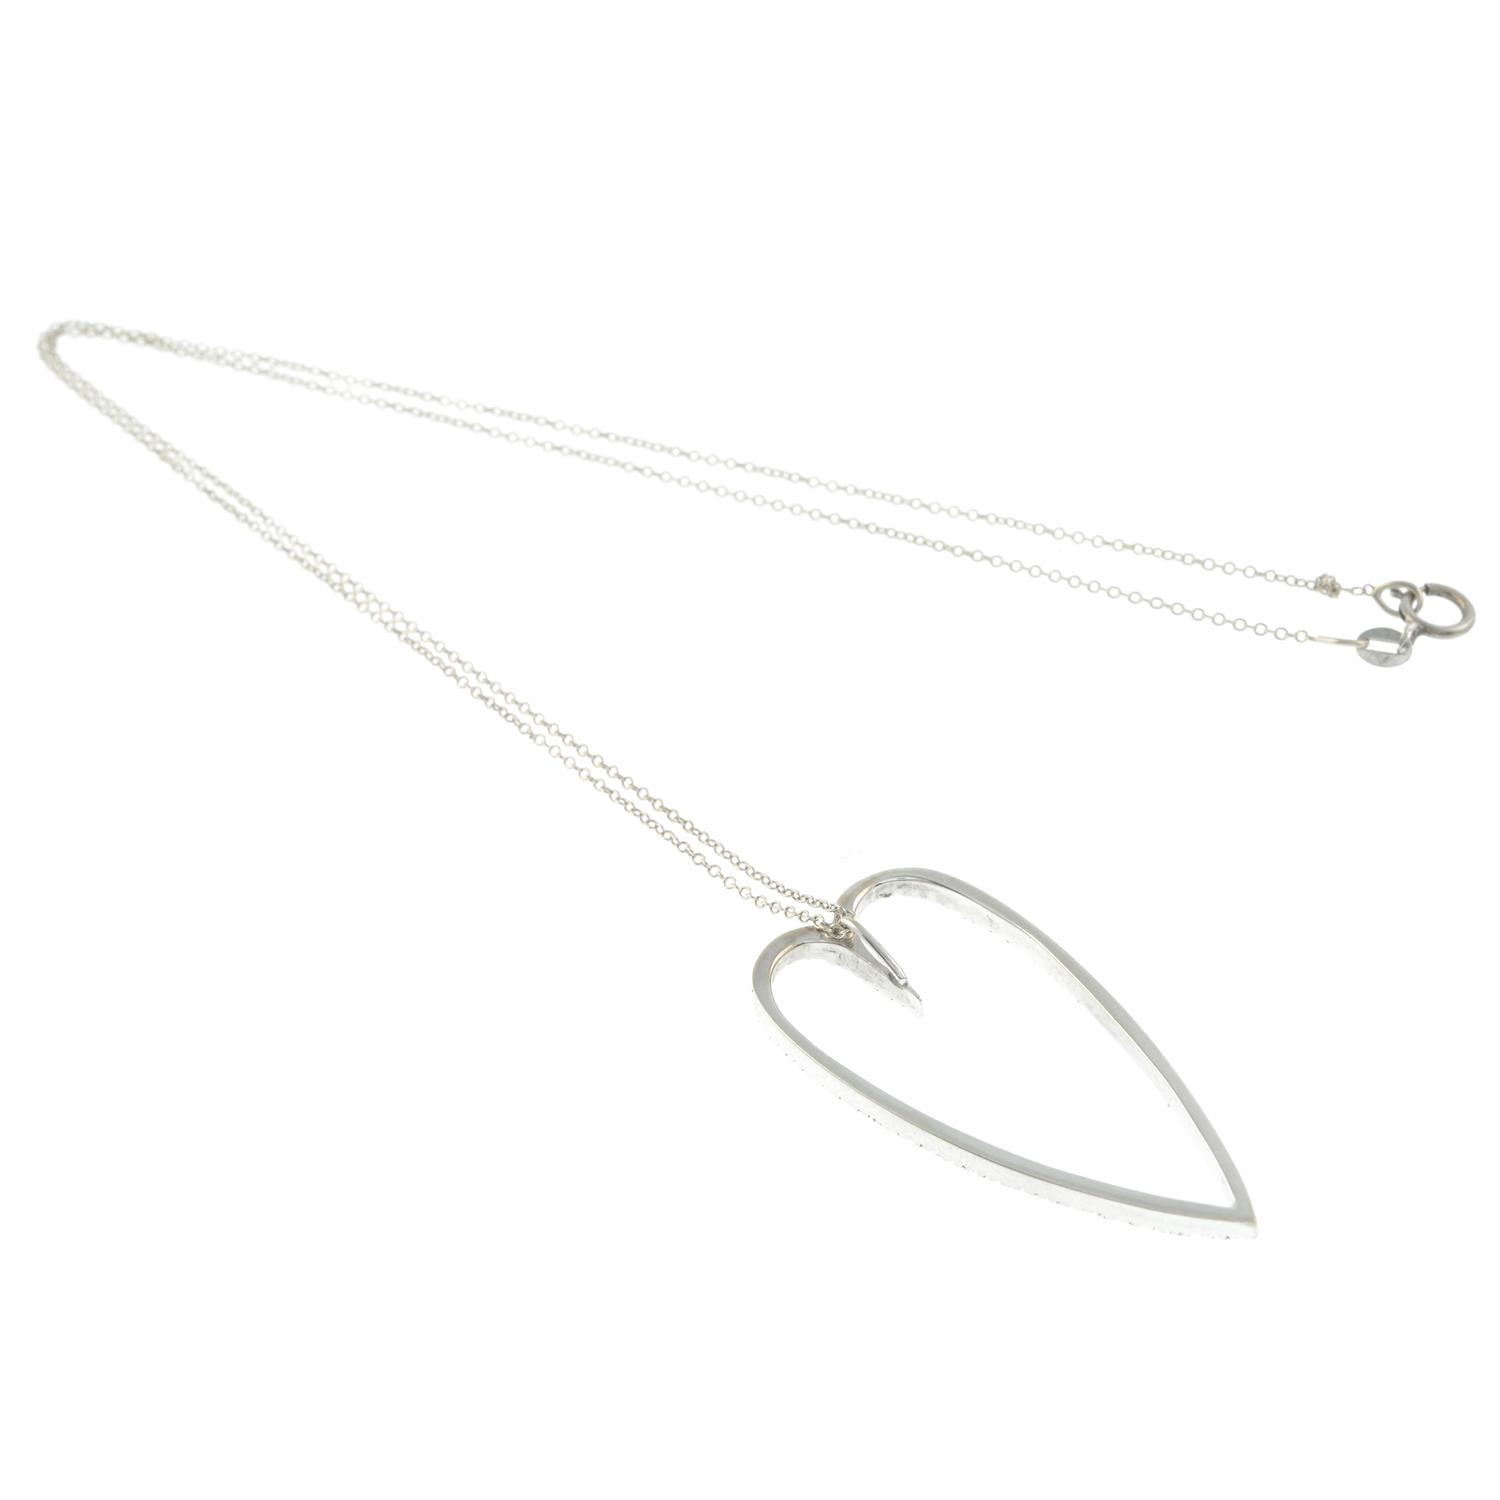 A diamond heart pendant, with trace-link chain. - Image 2 of 2